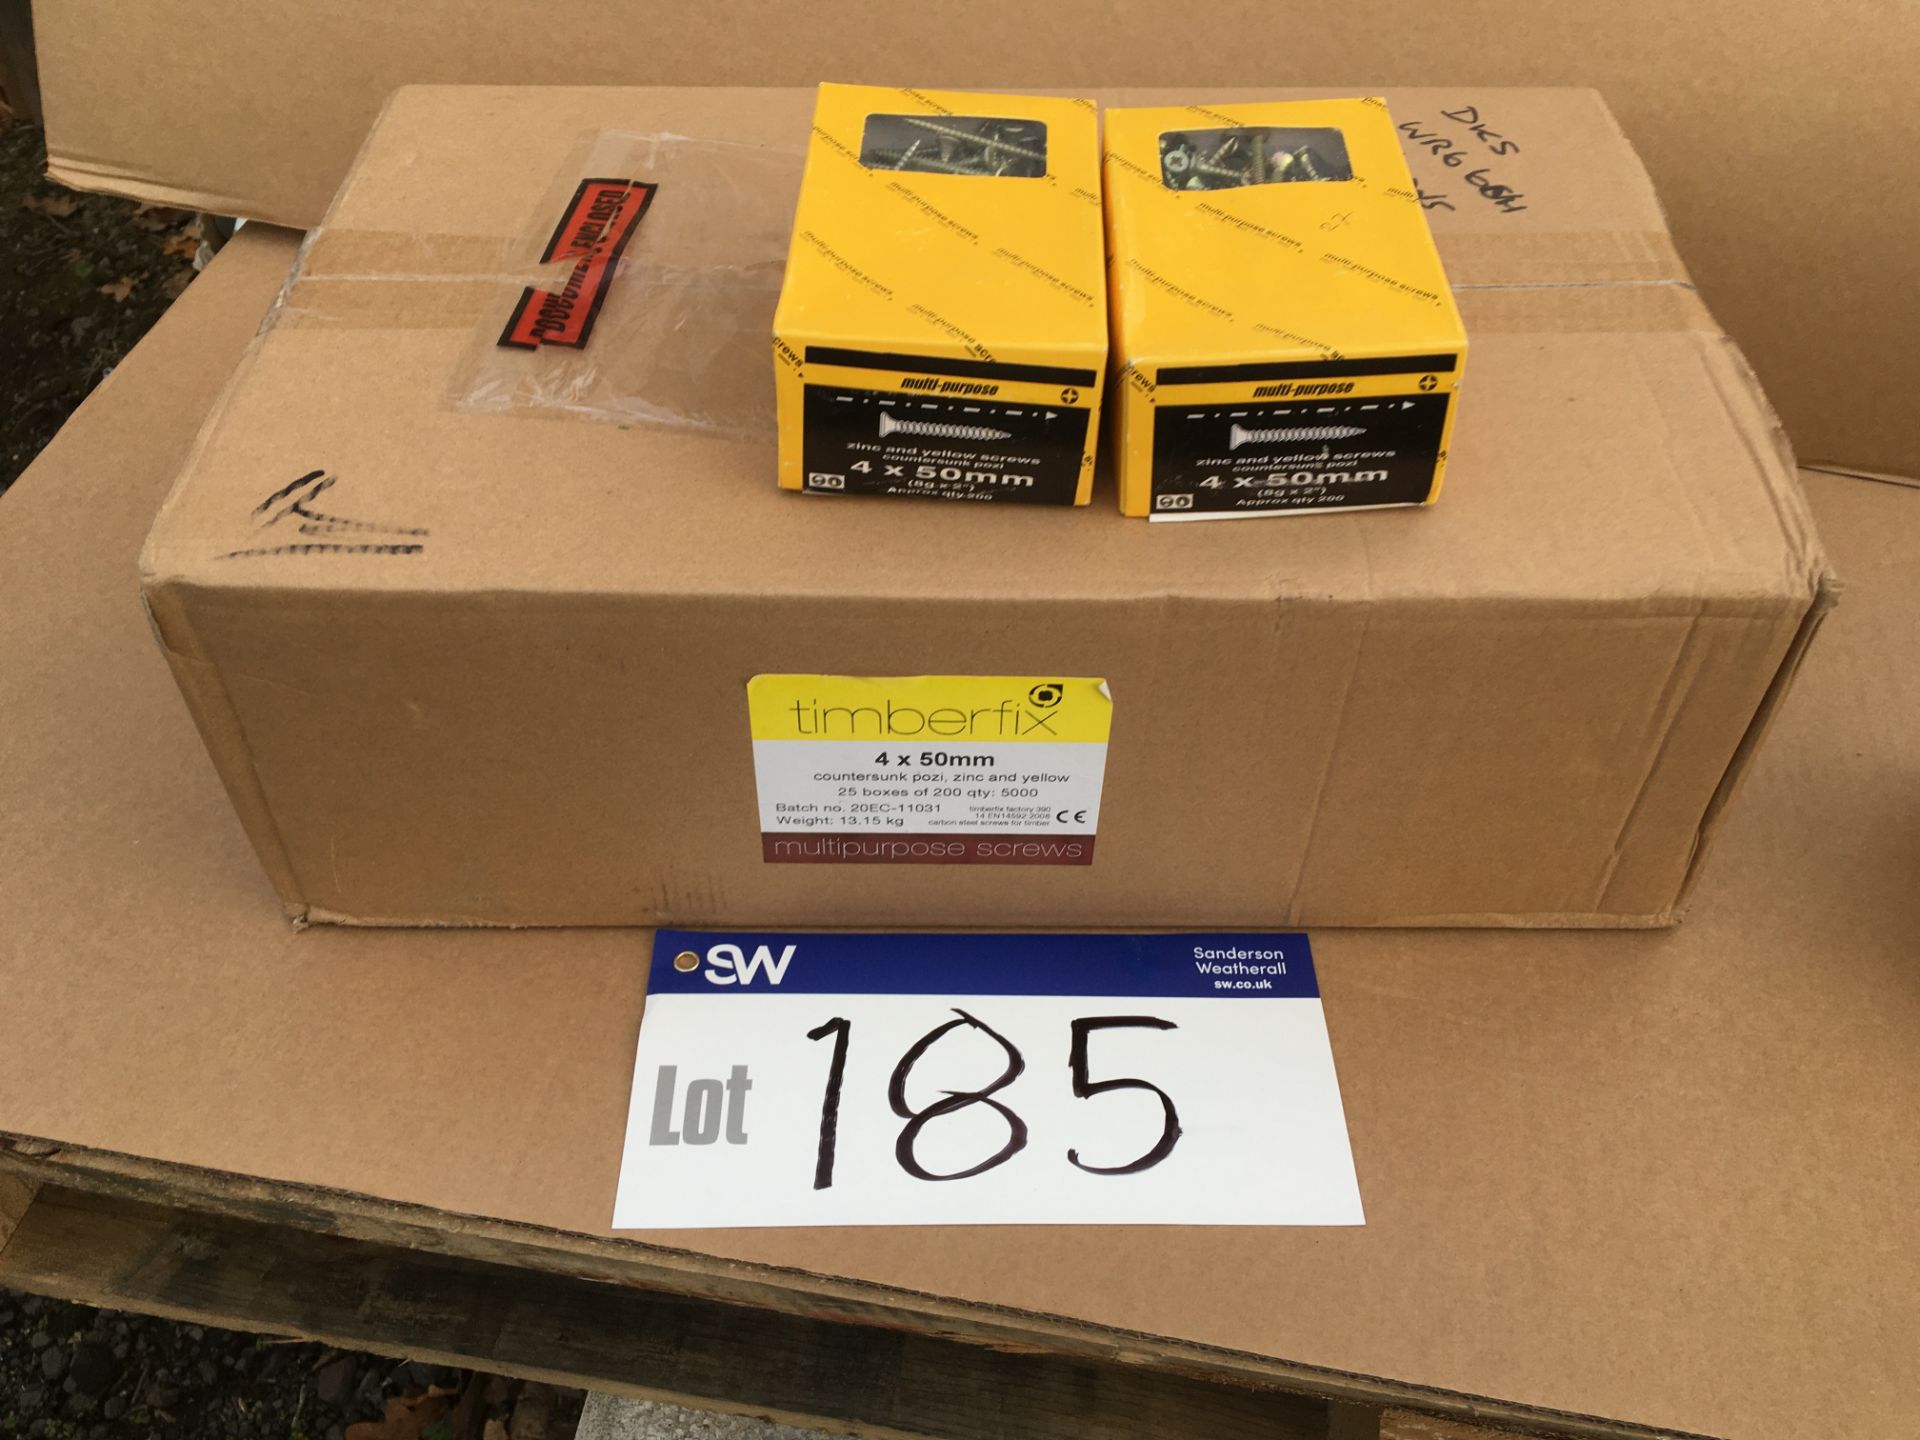 27 Boxes x Pozi Twinfast Screws (5400), 2in x 8 yellow (additional lot to auction catalogue)Please